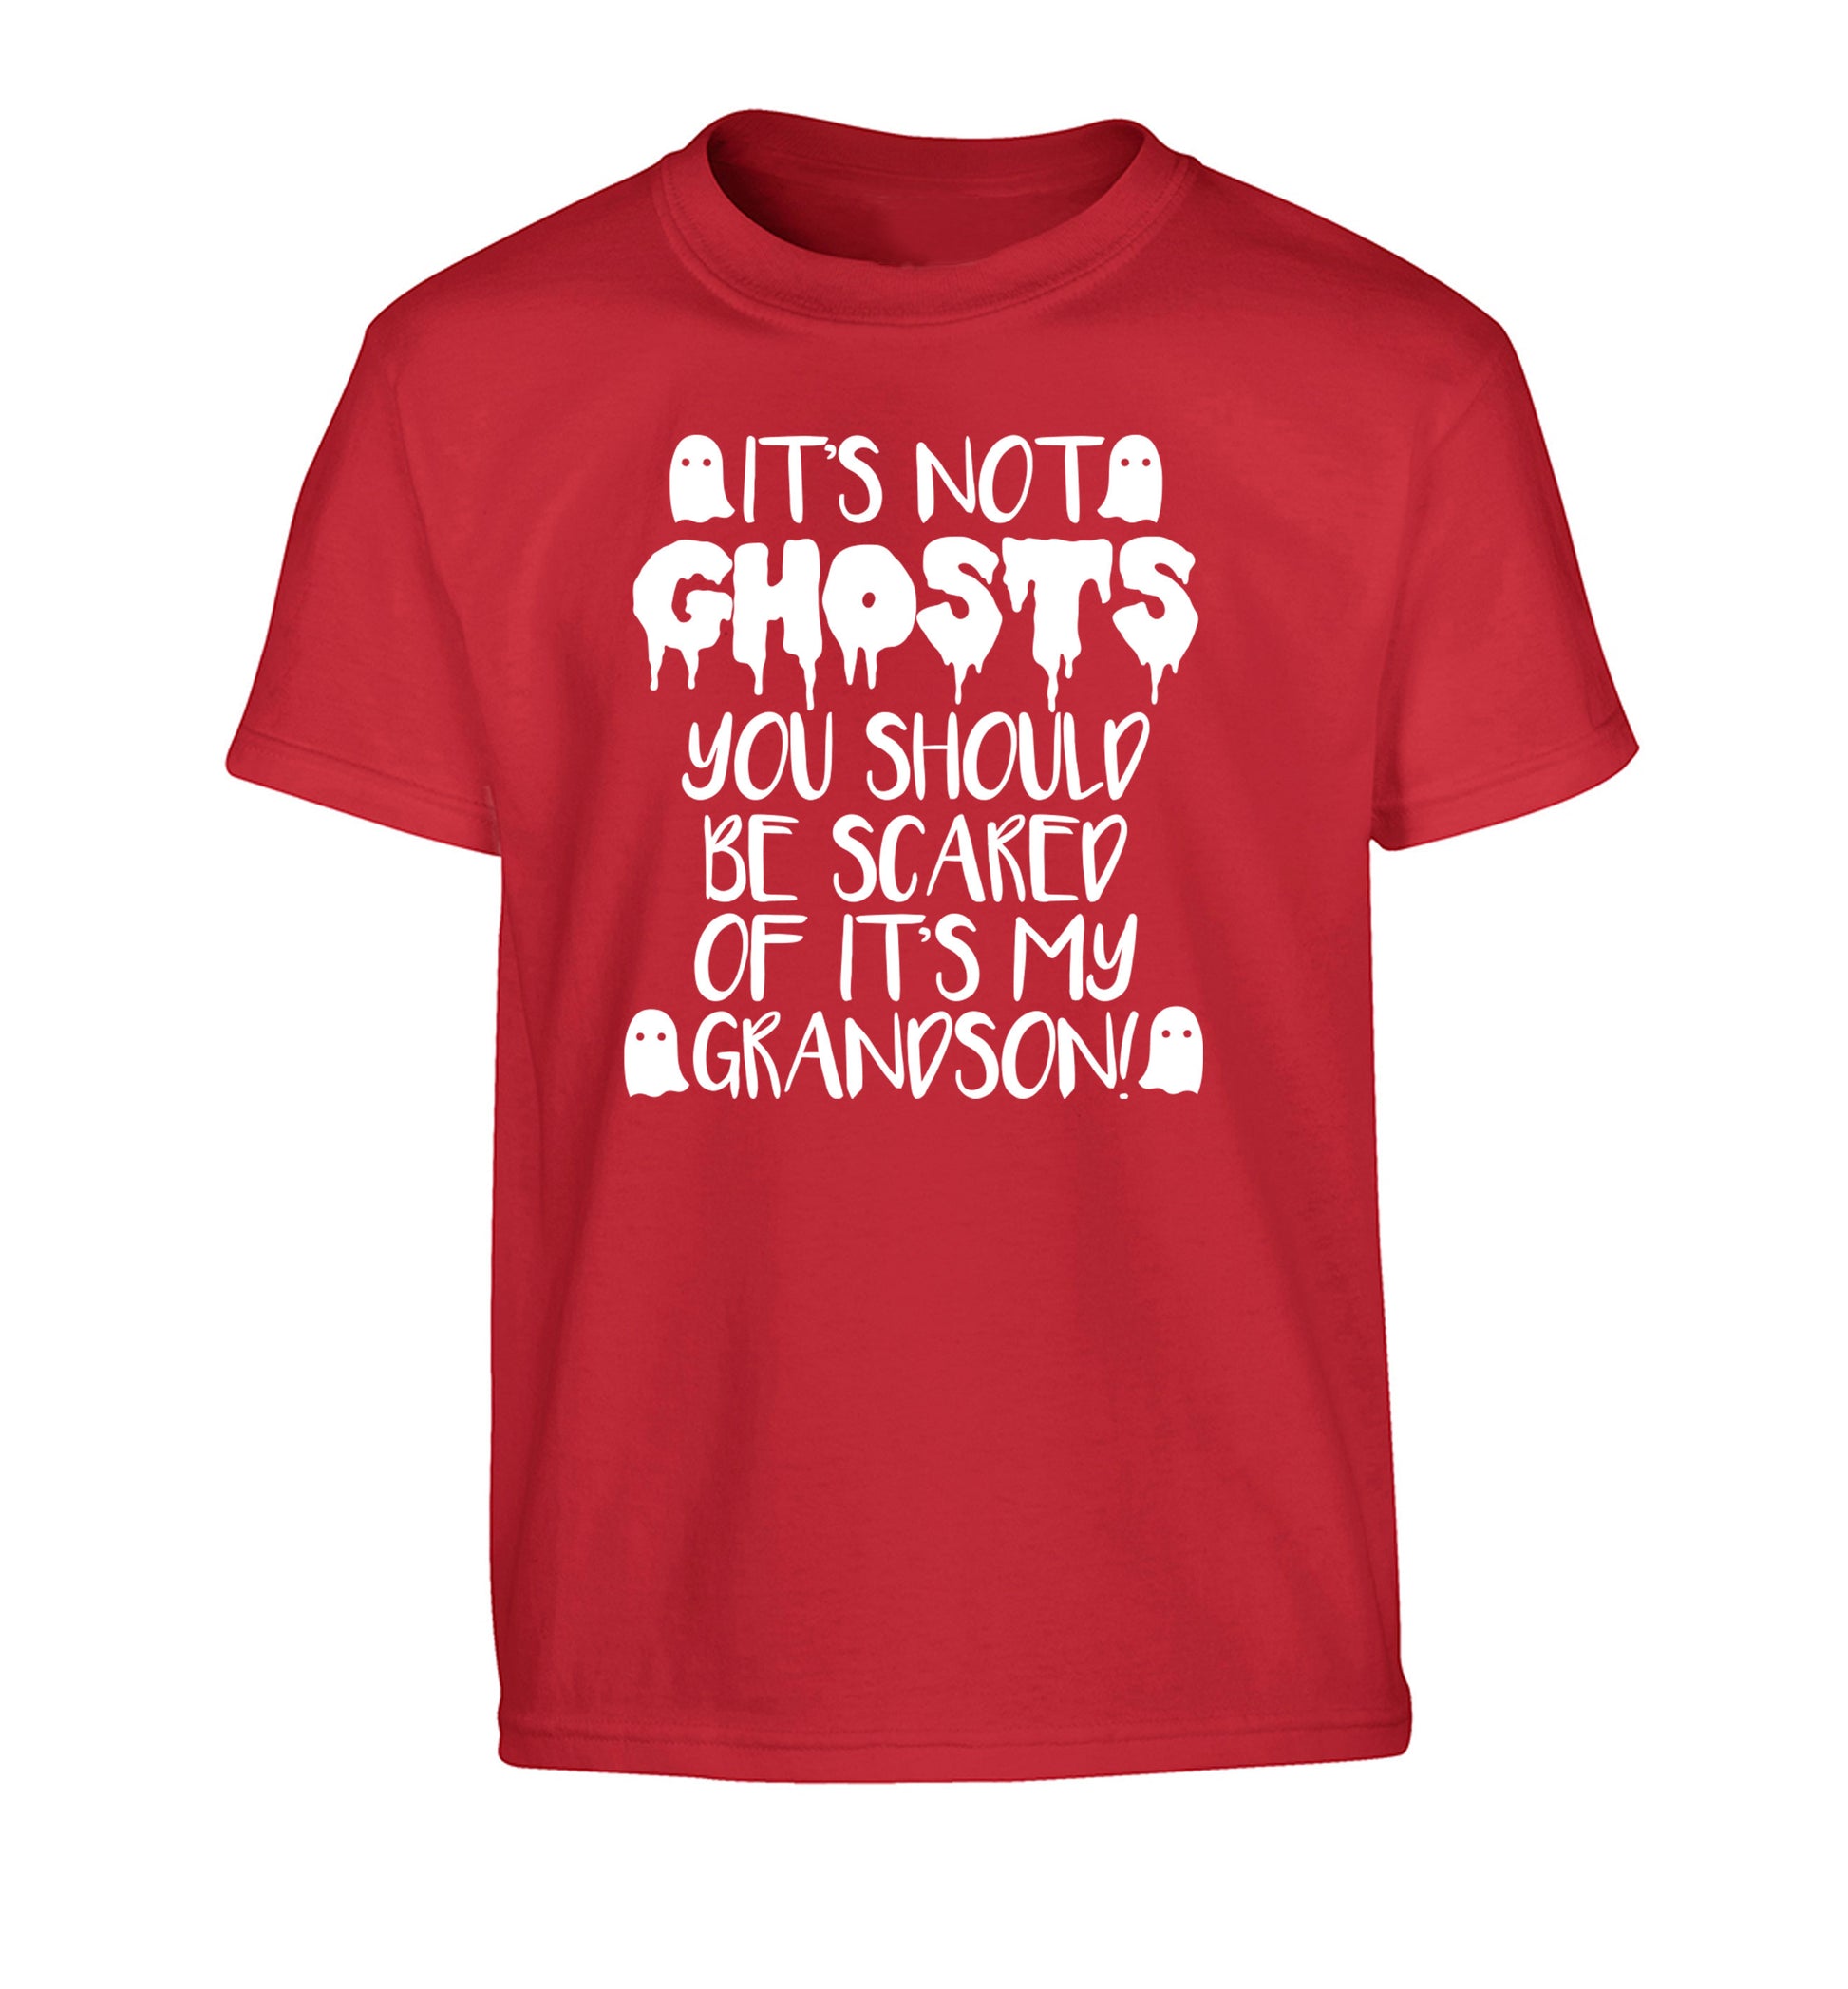 It's not ghosts you should be scared of it's my grandson! Children's red Tshirt 12-14 Years